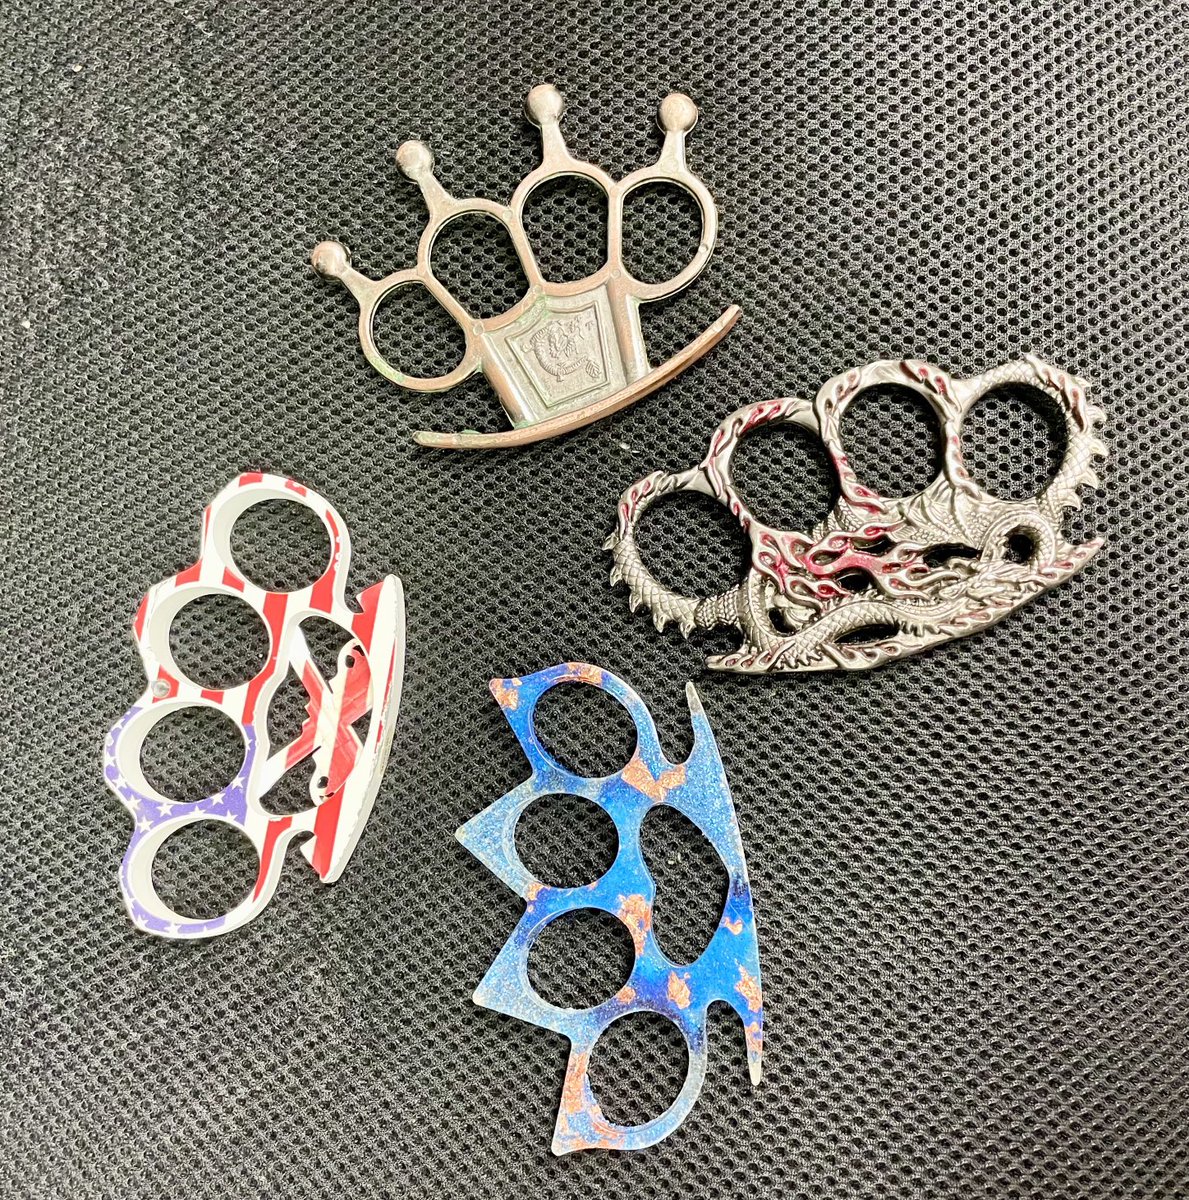 Unfortunately it is a common mistake for travelers to bring brass knuckles to @TSA security checkpoints. Here are a few examples of knuckles detected by TSA officers recently at ⁦@Reagan_Airport⁩.